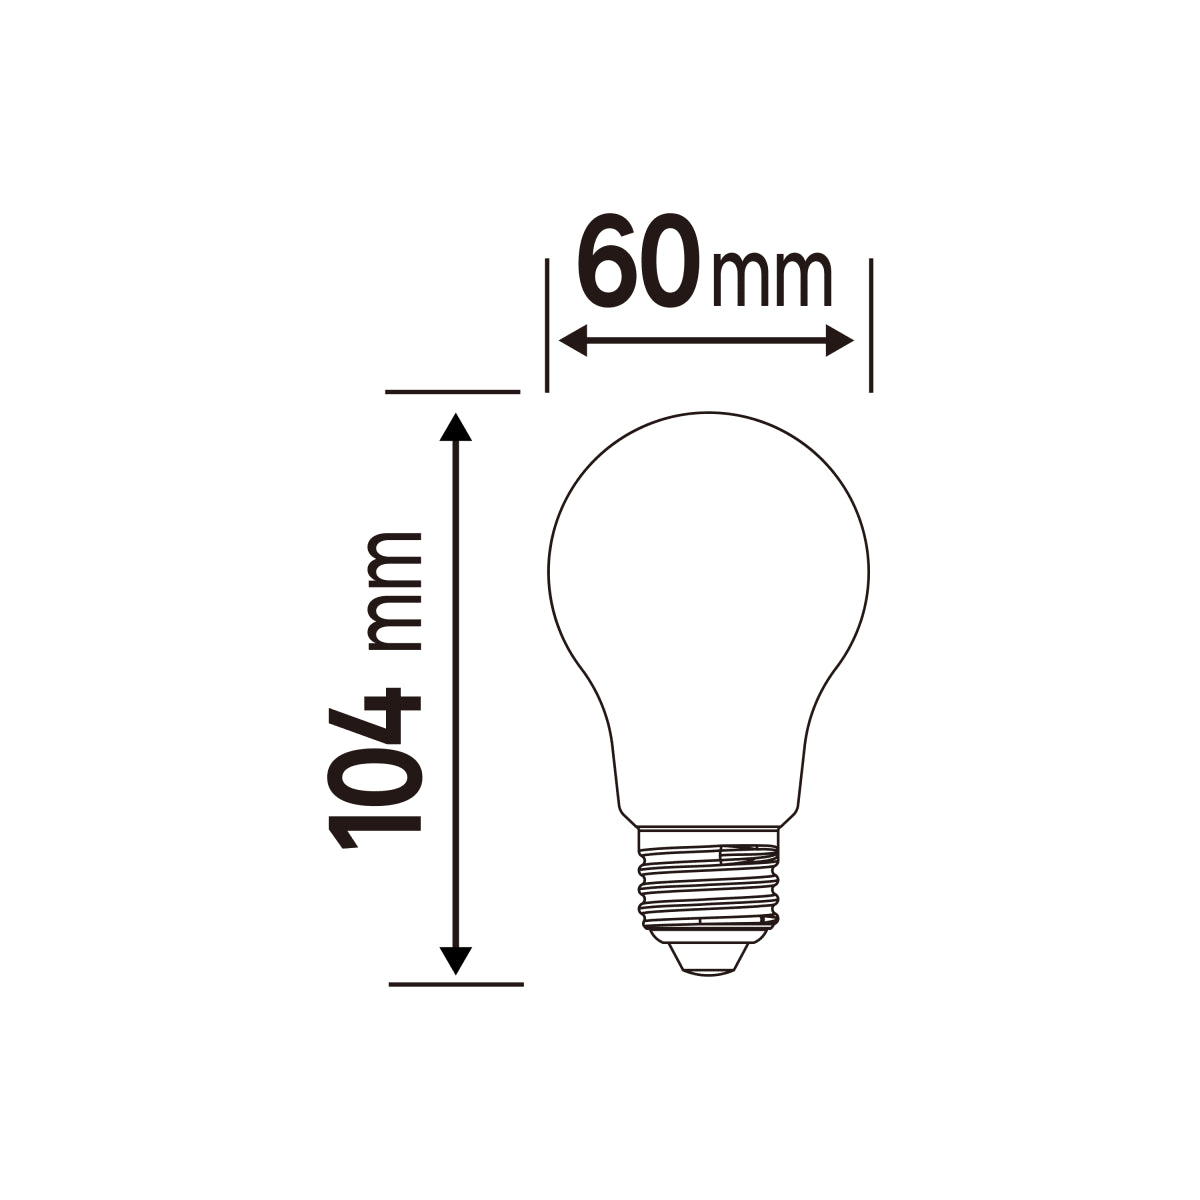 LED BULB E27=60W DROP FROSTED WARM LIGHT DIMMABLE